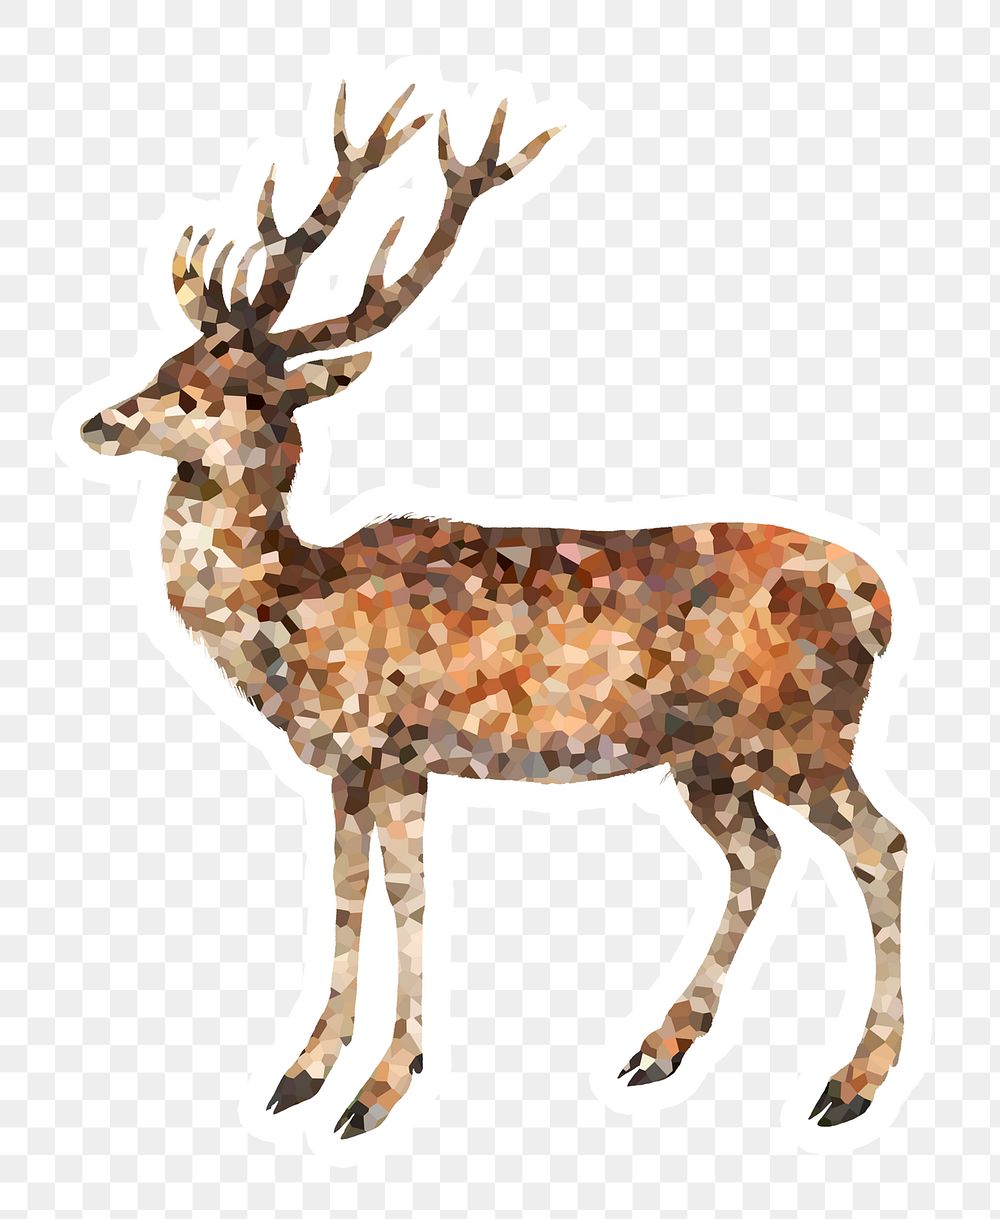 Crystallized style deer illustration with a white border sticker